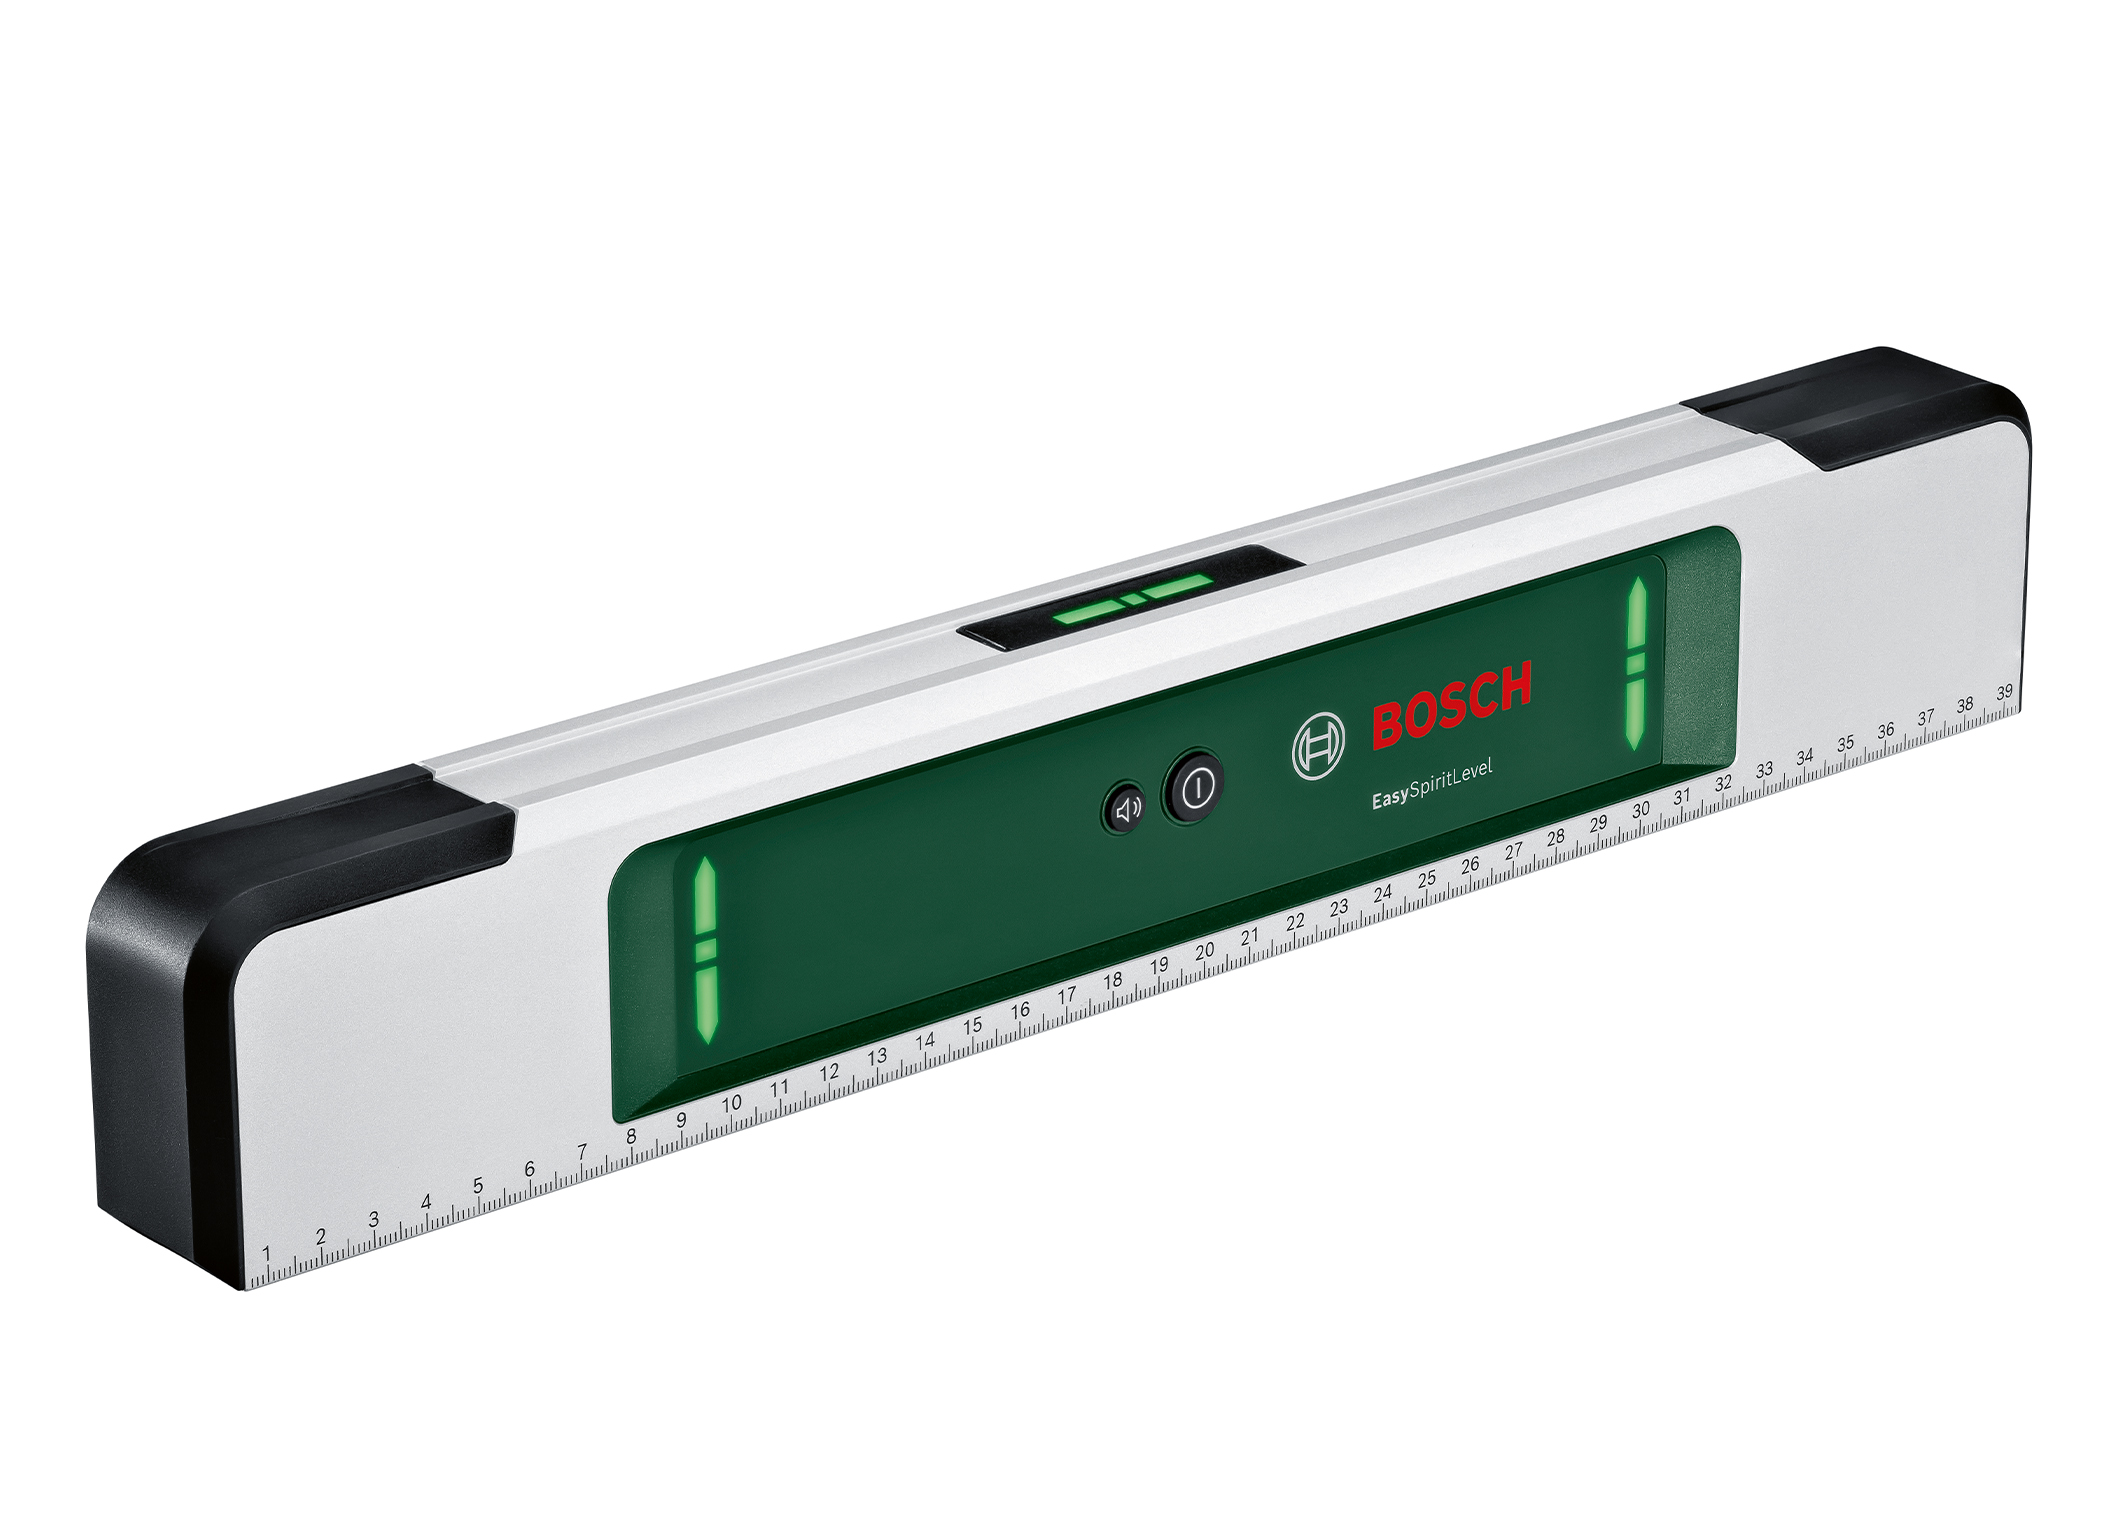 Measuring tools from Bosch for DIYers: New EasySpiritLevel LED spirit level simplifies levelling applications for DIYers